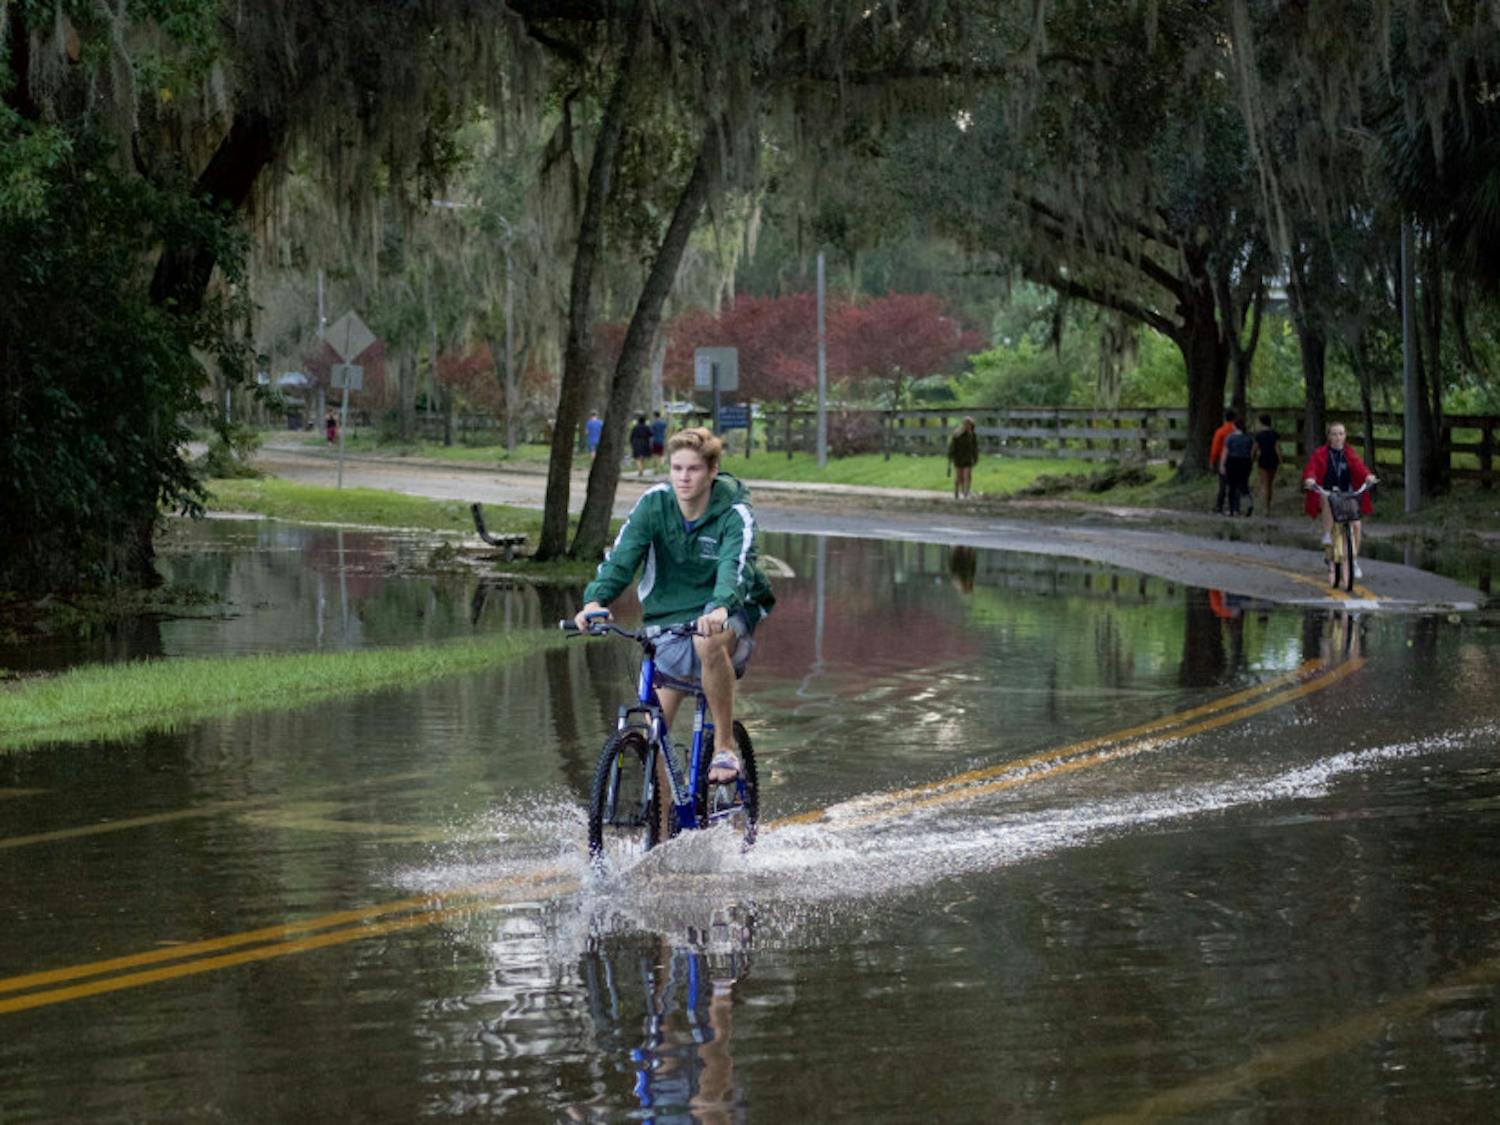 Students ride their bicycles through nearly a foot of water on the streets near Lake Alice. Lake Alice is one of the areas that flooded on campus during Hurricane Irma.